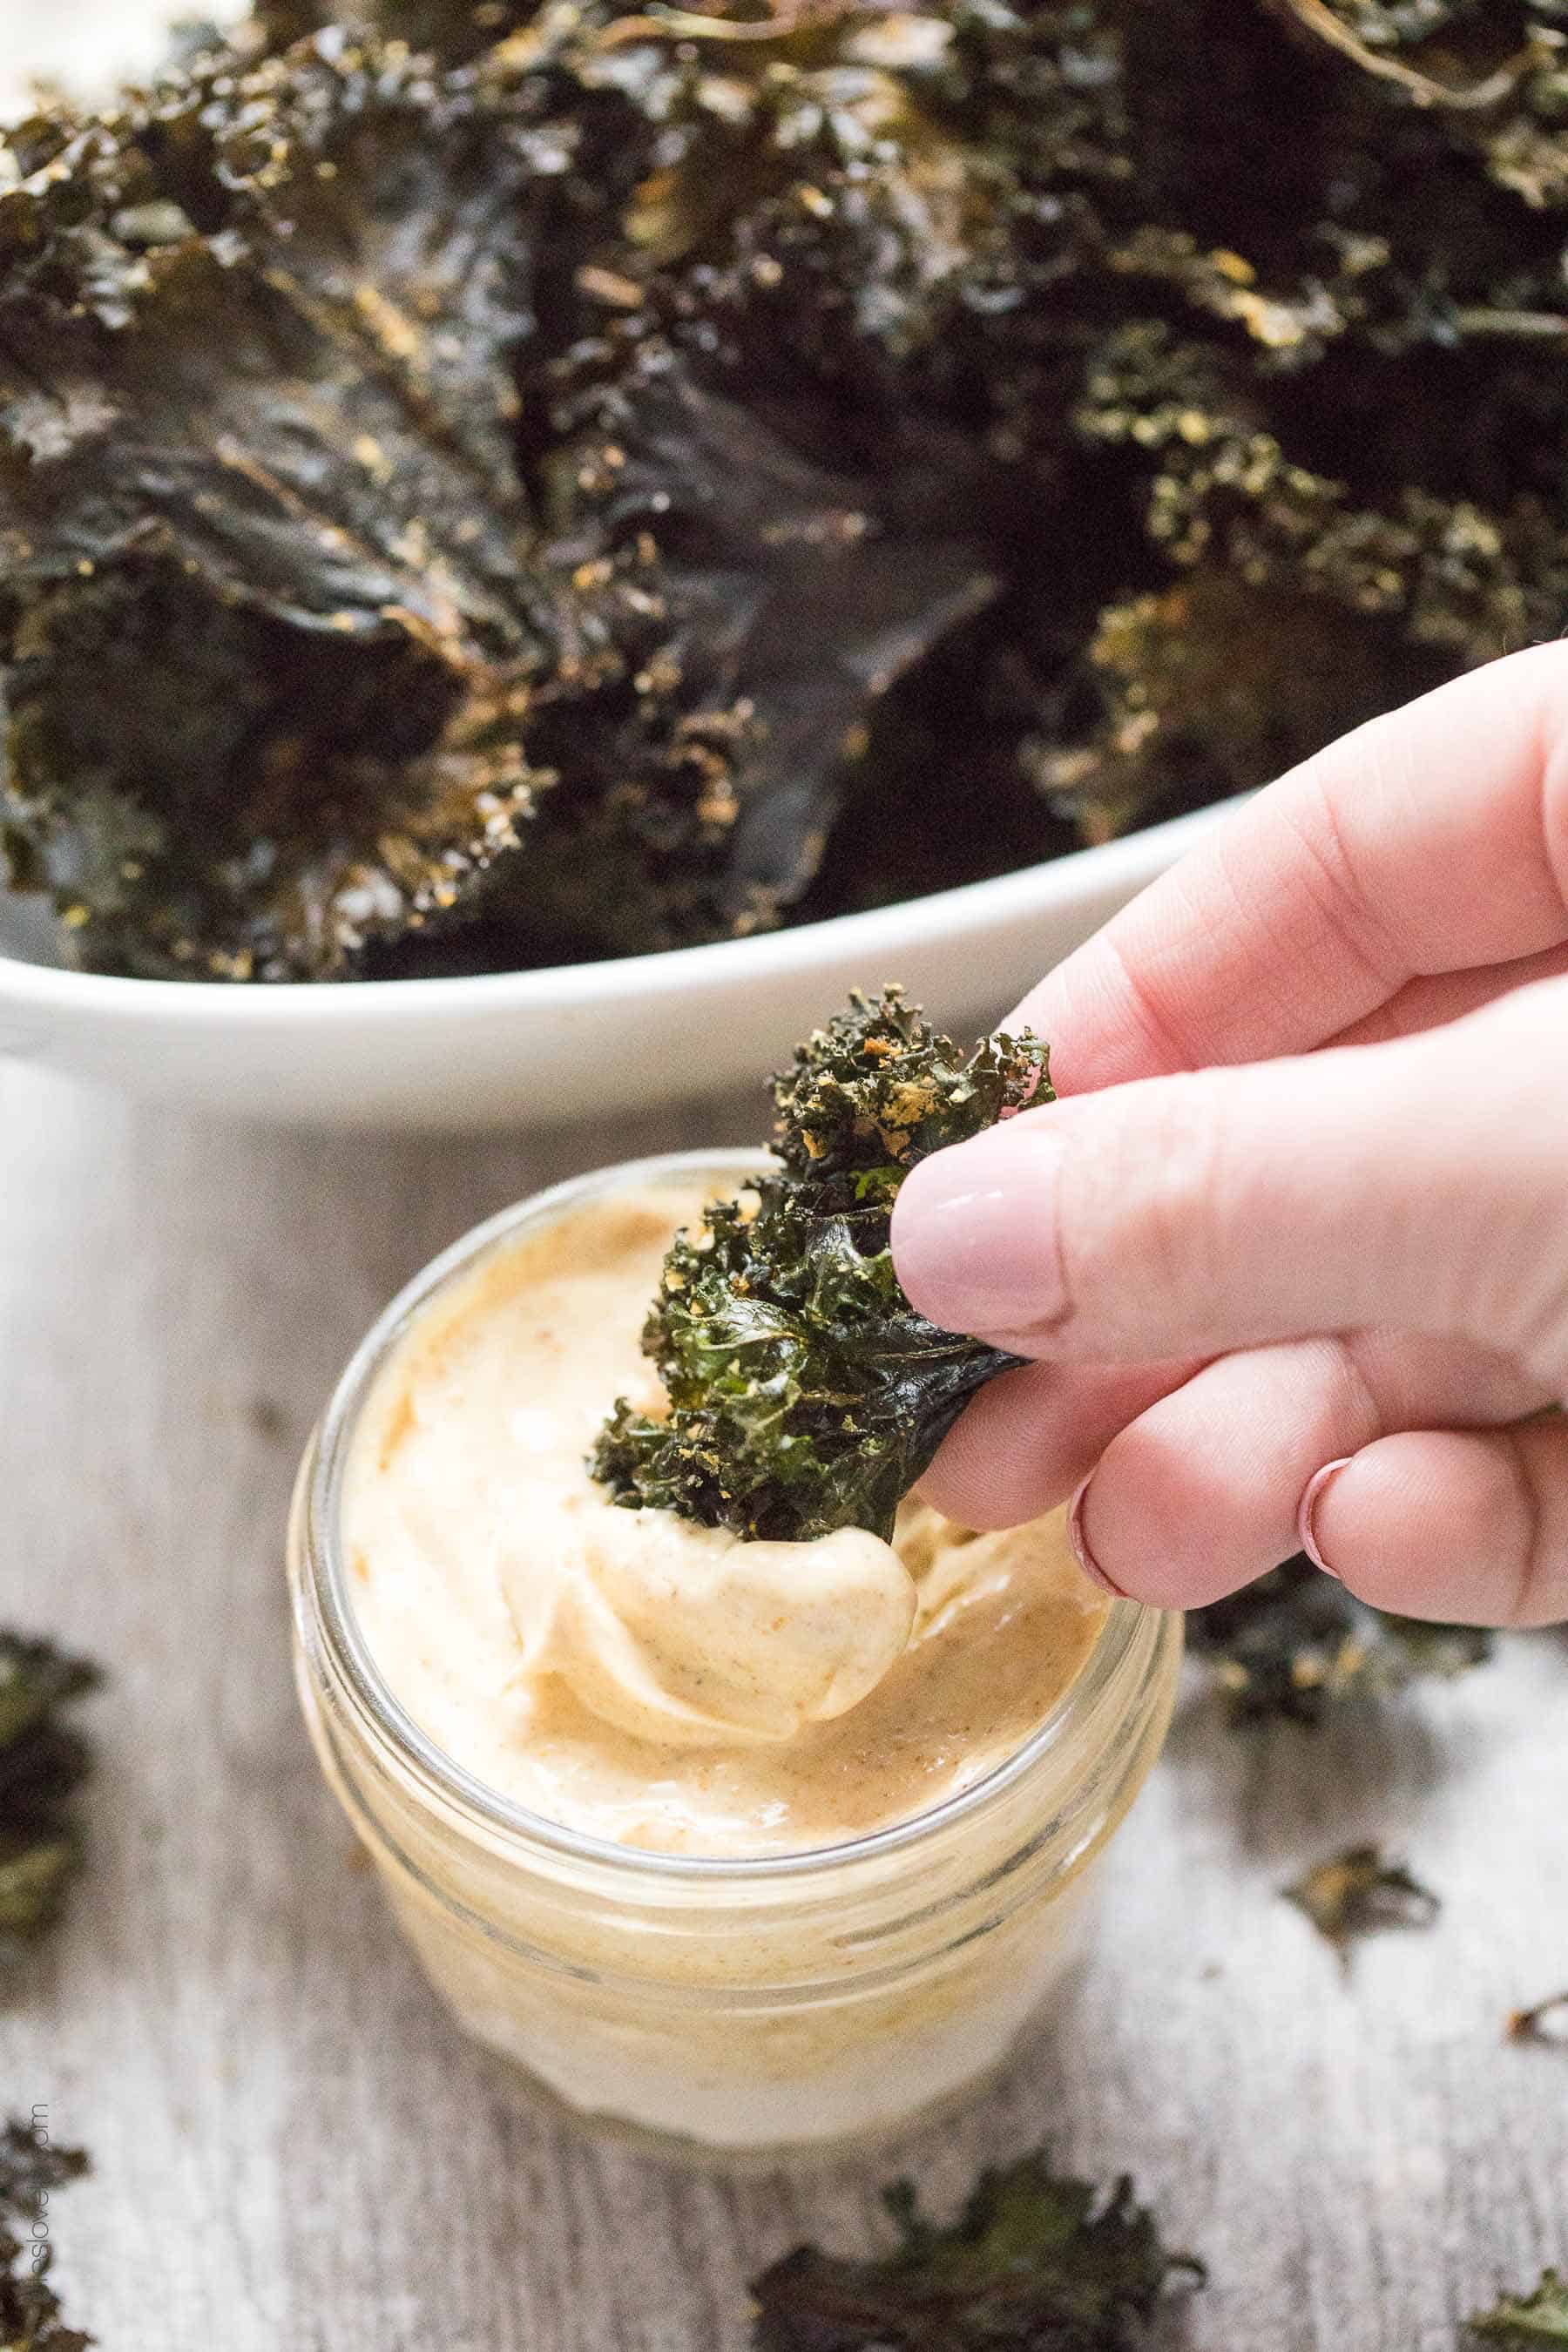 Roasted Kale Chips with Curry Aioli - a crispy, crunchy salty snack that is Paleo & Whole30. Ready in 20 minutes. Served with a curry aioli dipping sauce.